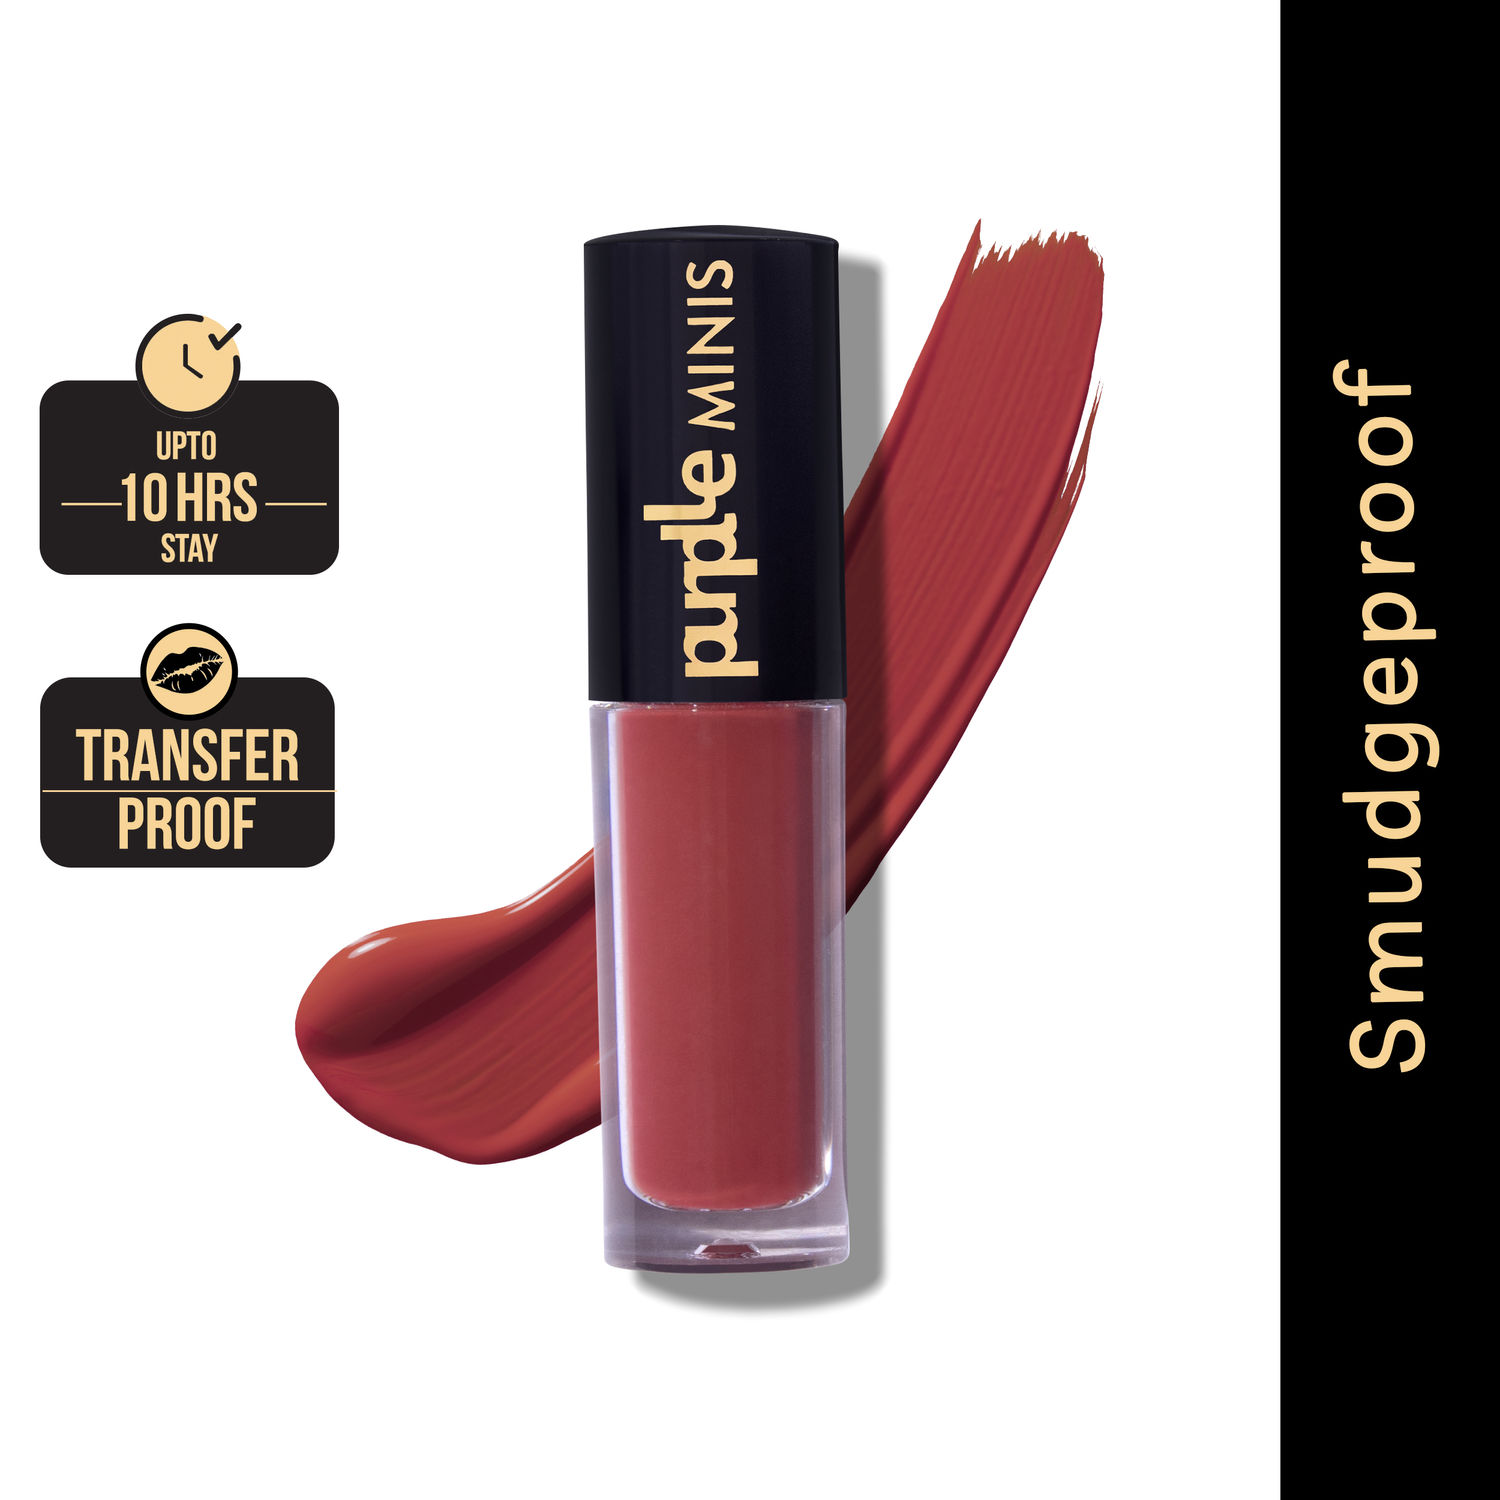 Purplle Ultra HD Matte Mini Liquid Lipstick, Red - My First Bae 9 | Highly Pigmented | Non-drying | Long Lasting | Easy Application | Water Resistant | Transferproof | Smudgeproof (1.6 ml)